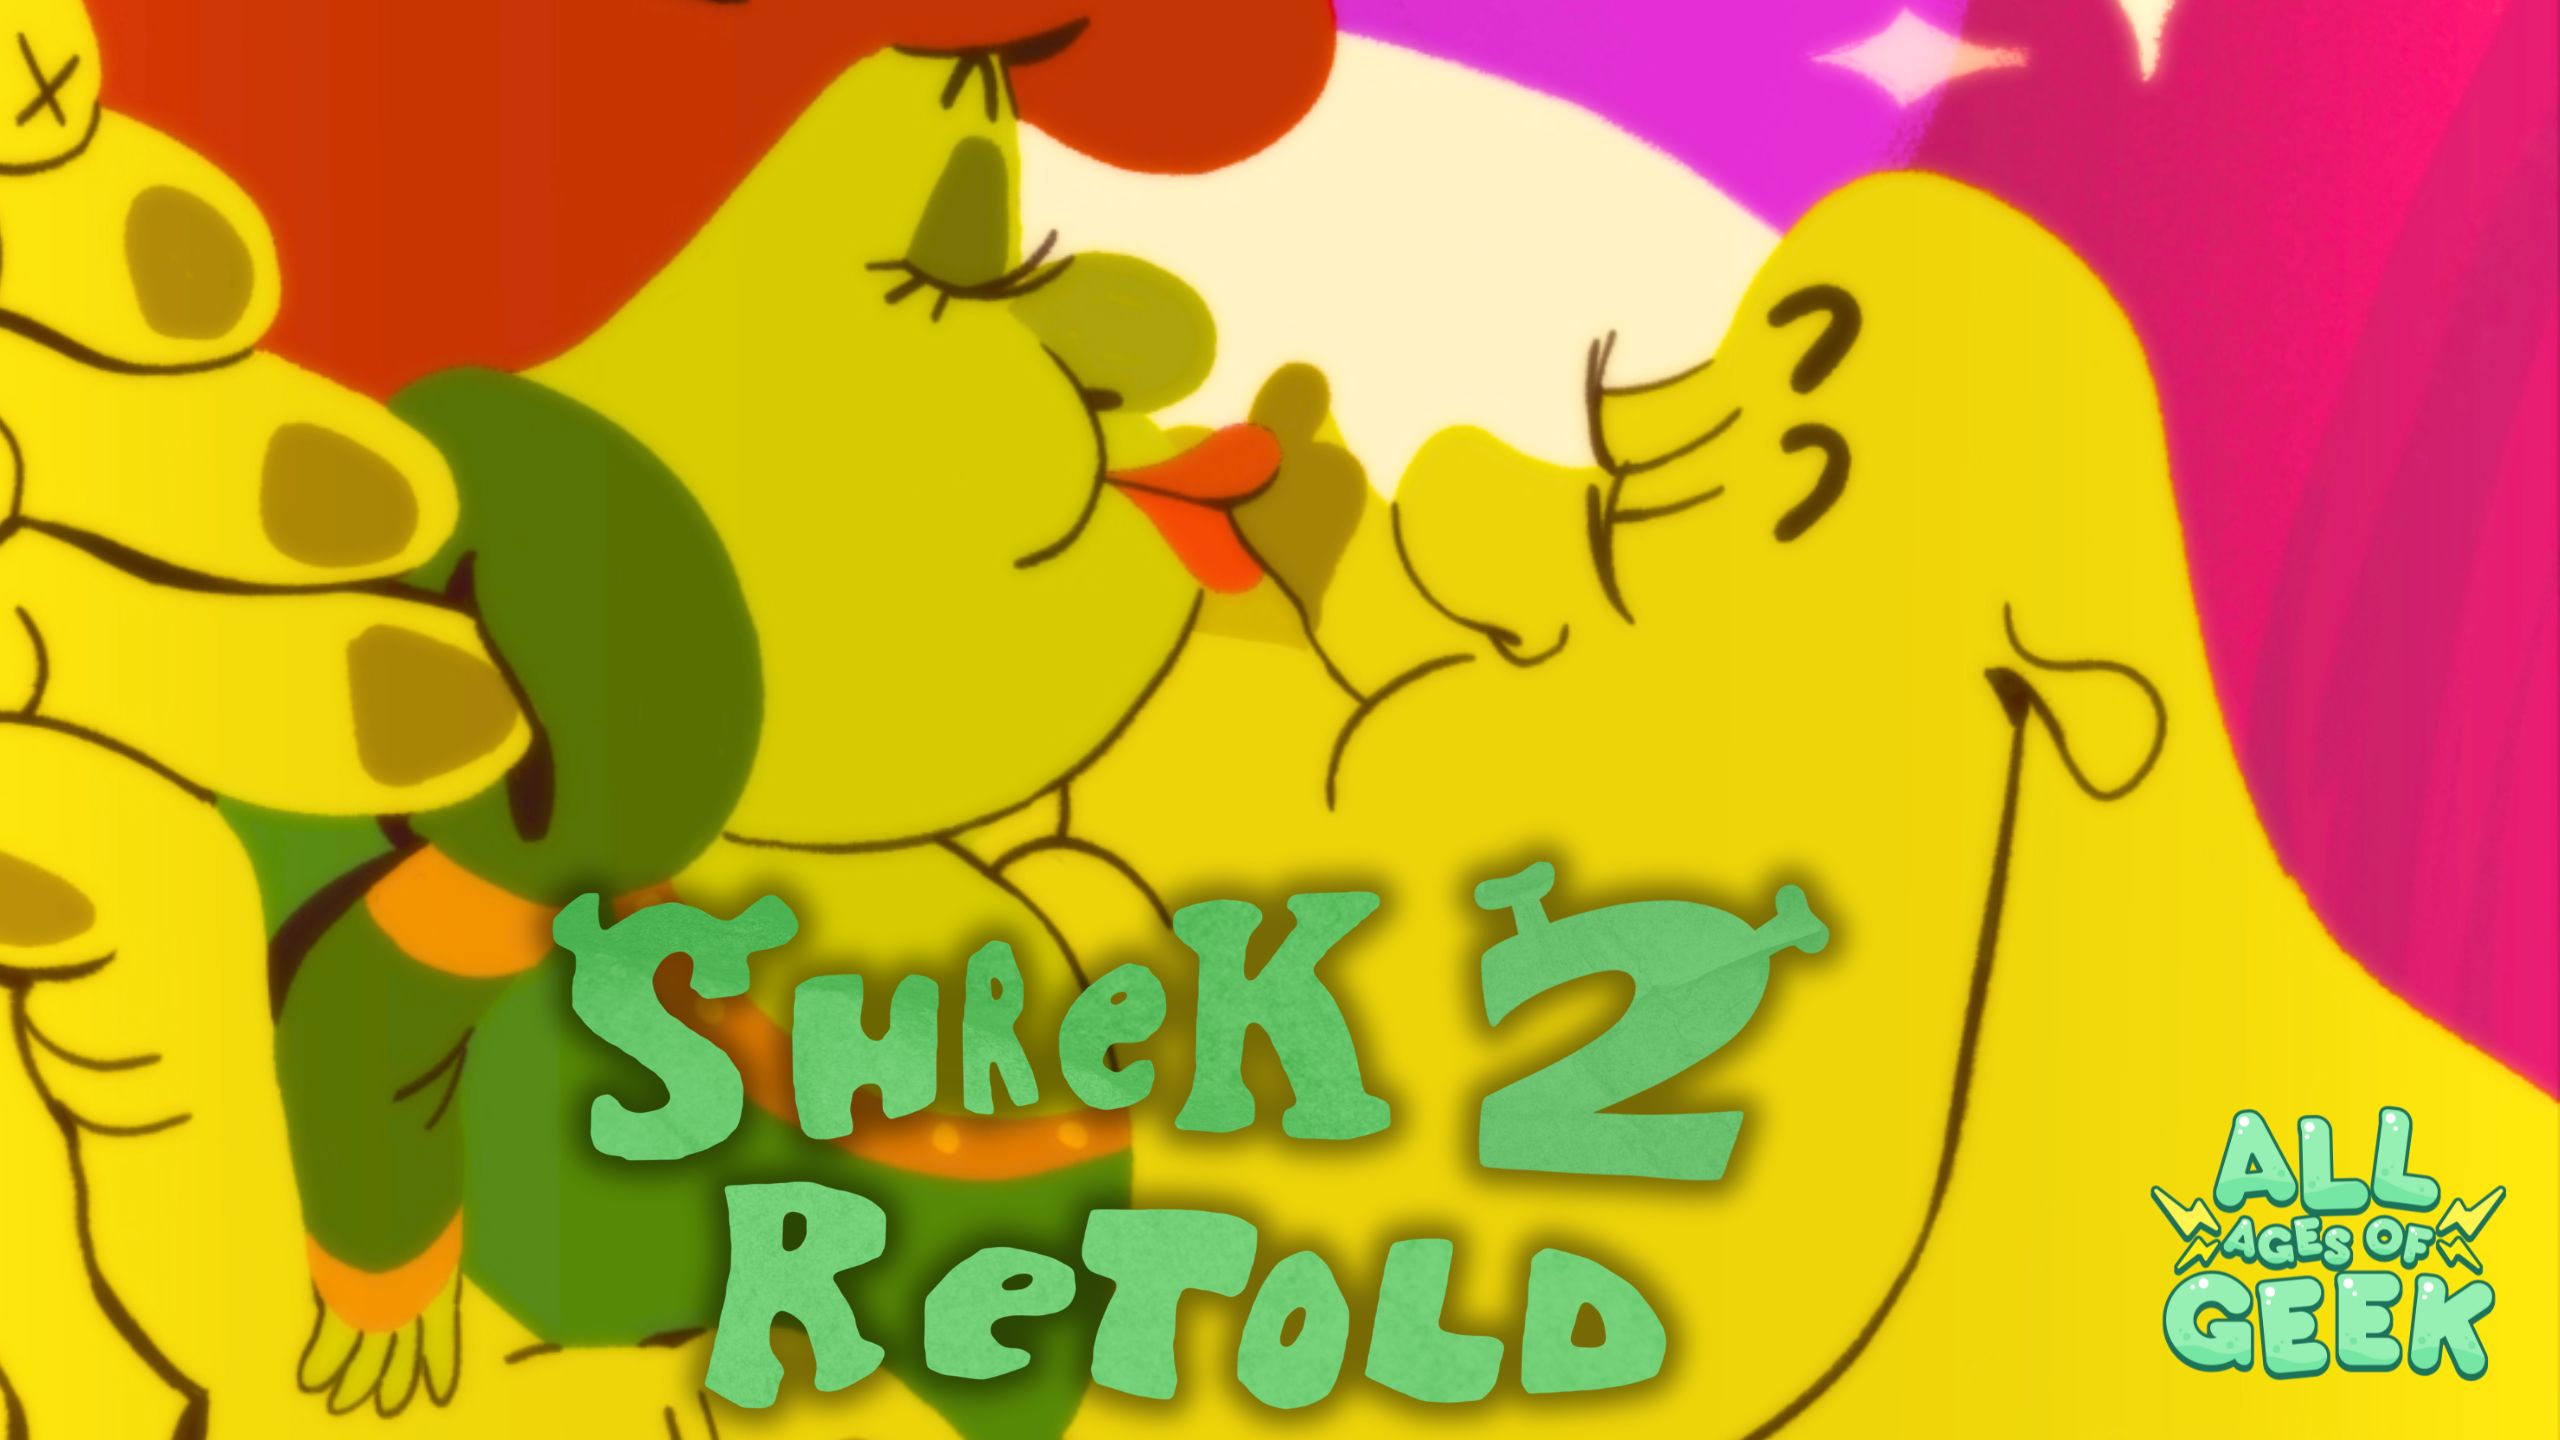 mage of a stylized drawing from "Shrek 2 Retold" featuring Shrek and Fiona kissing, with vibrant colors and exaggerated features. The text "Shrek 2 Retold" appears in green, with the All Ages of Geek logo in the bottom right corner.